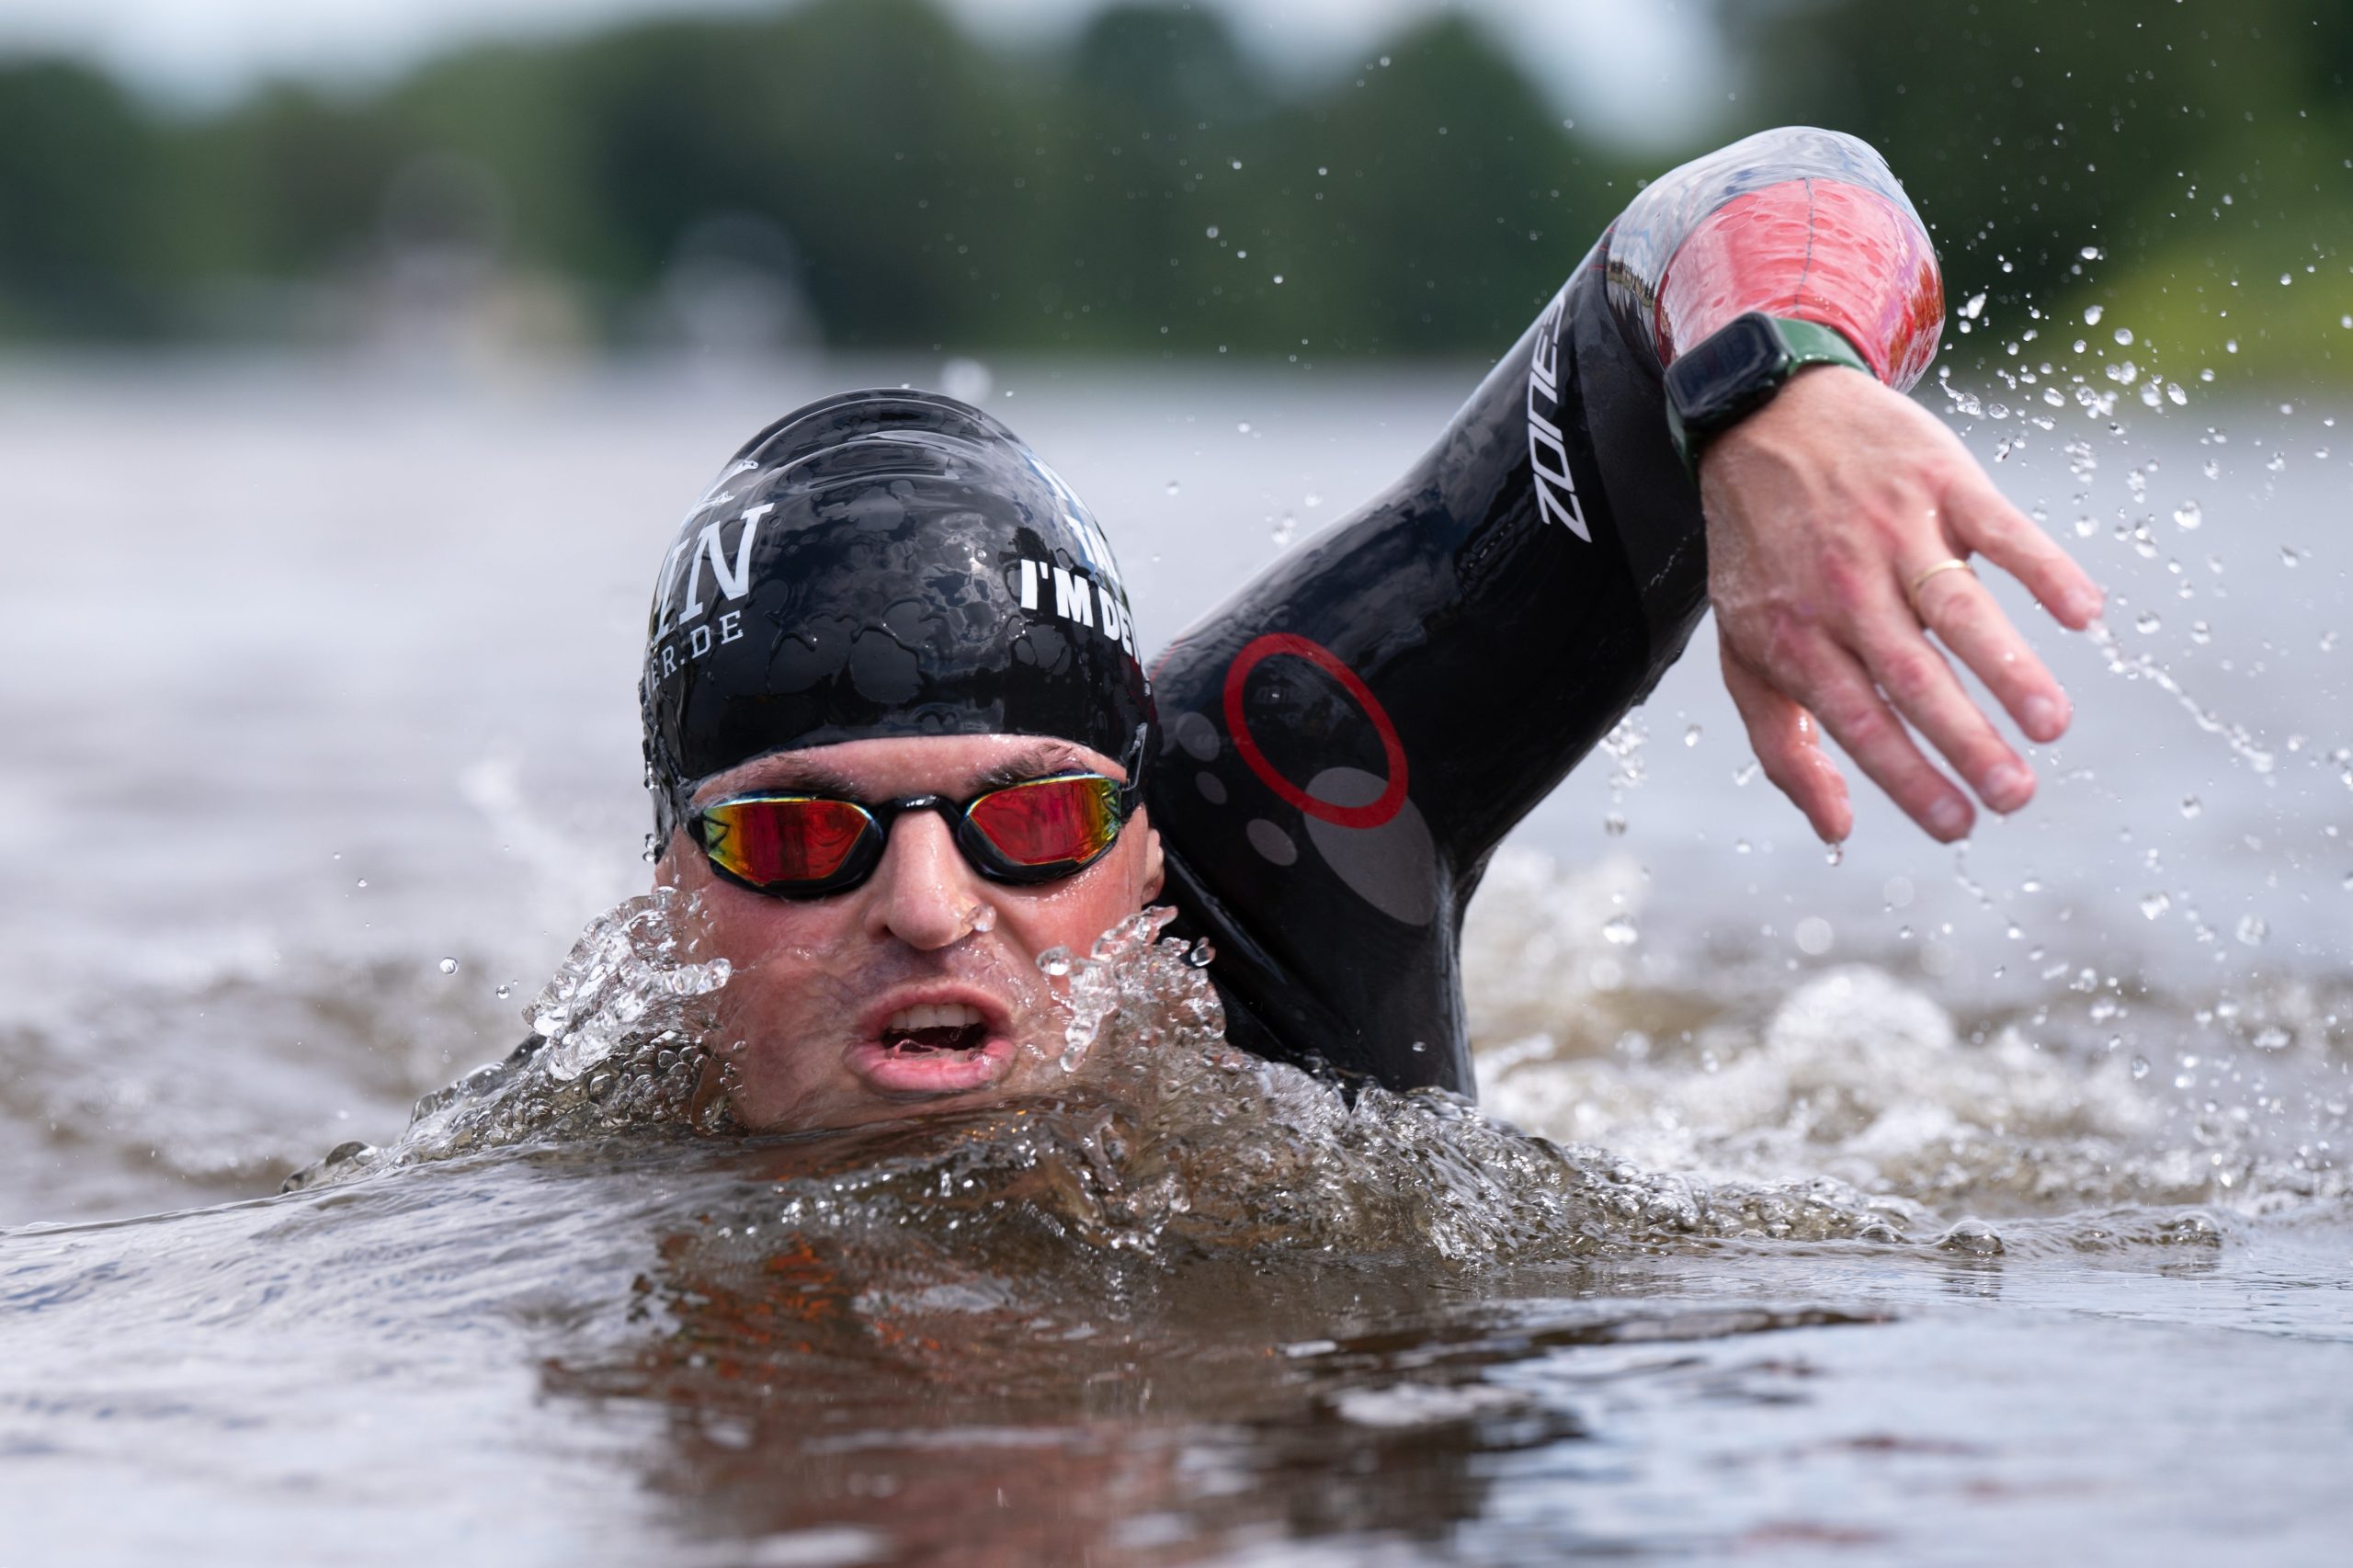 Watersports and Science - Chemnitz native Josef Hess wants to swim the entire Rhine in just 25 days